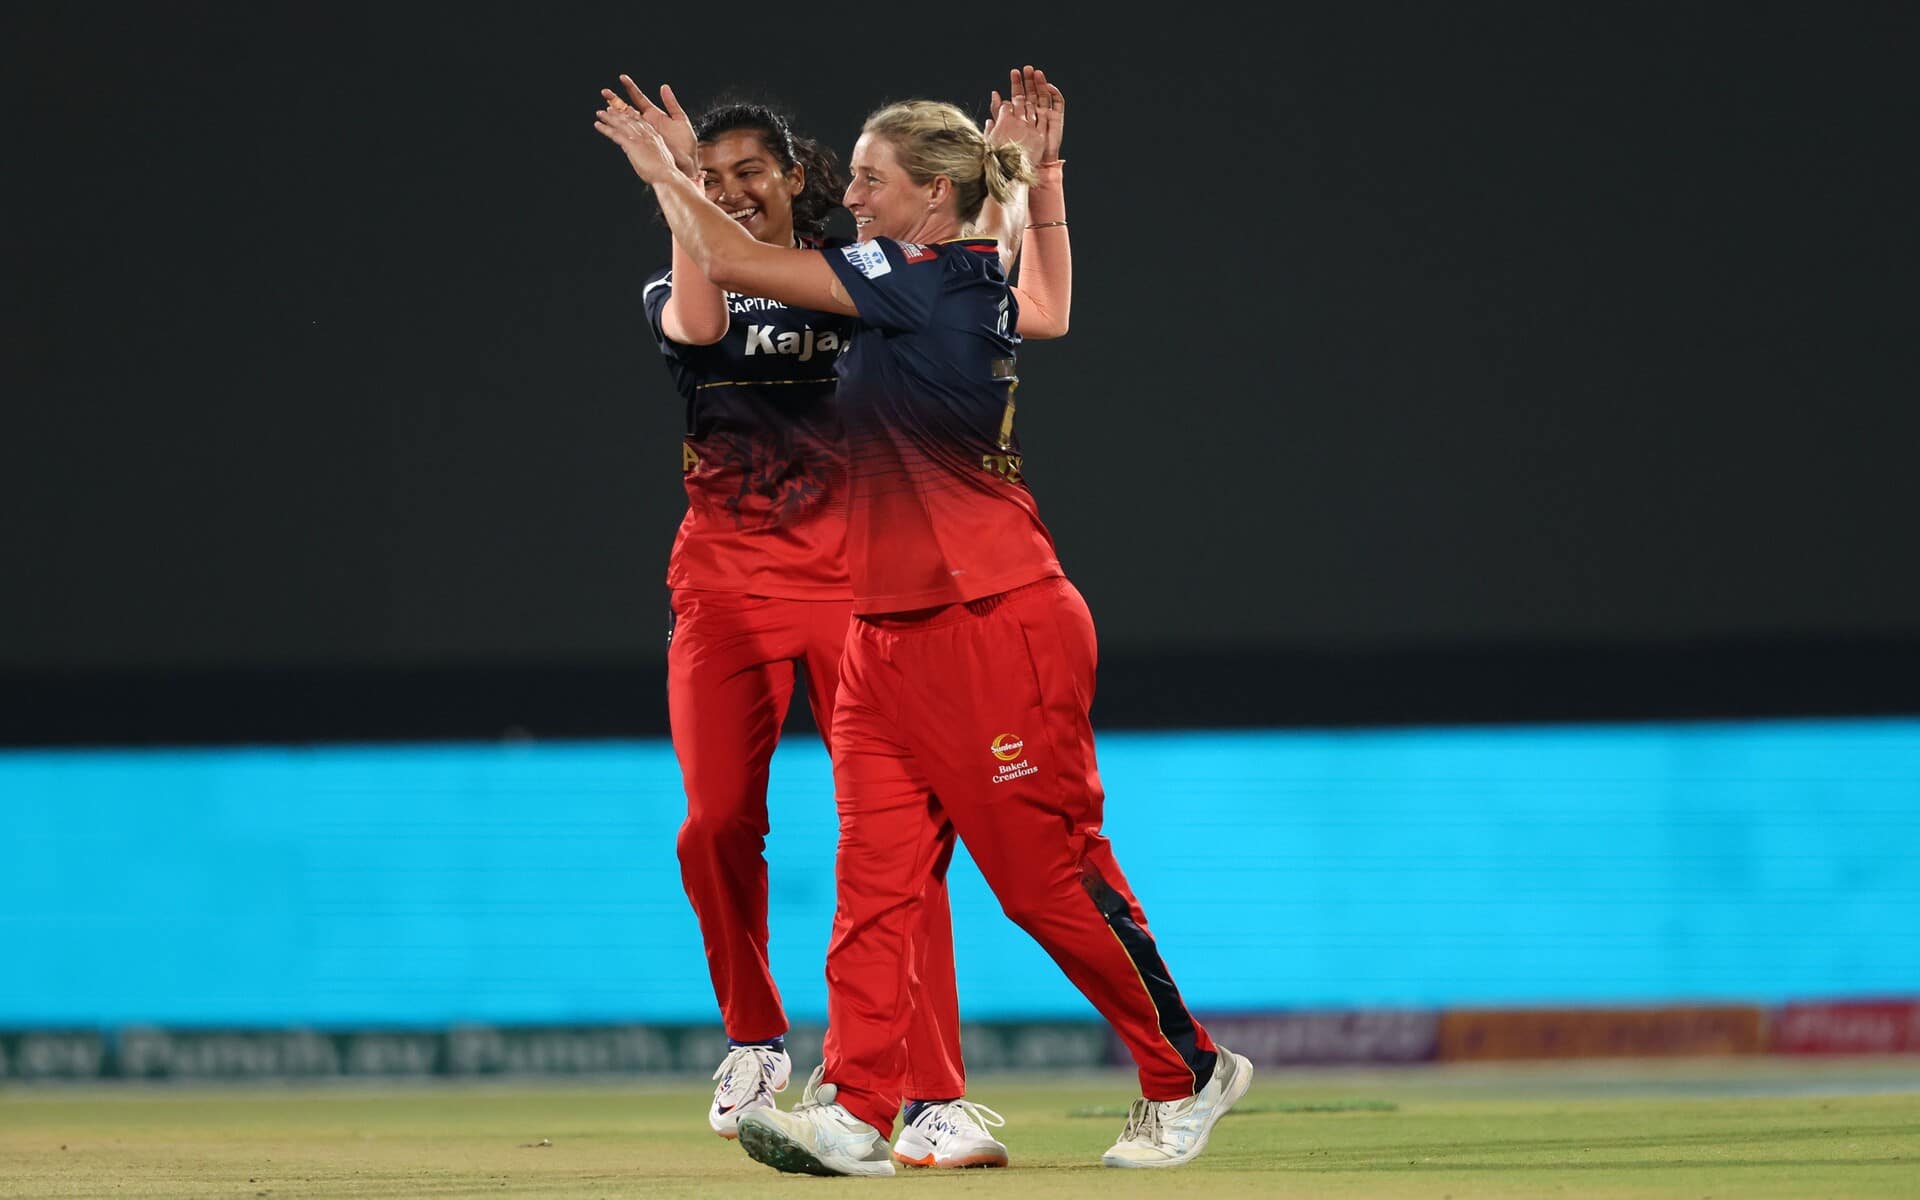 Sophie Devine picked up first wicket for RCB (Source: WPL)